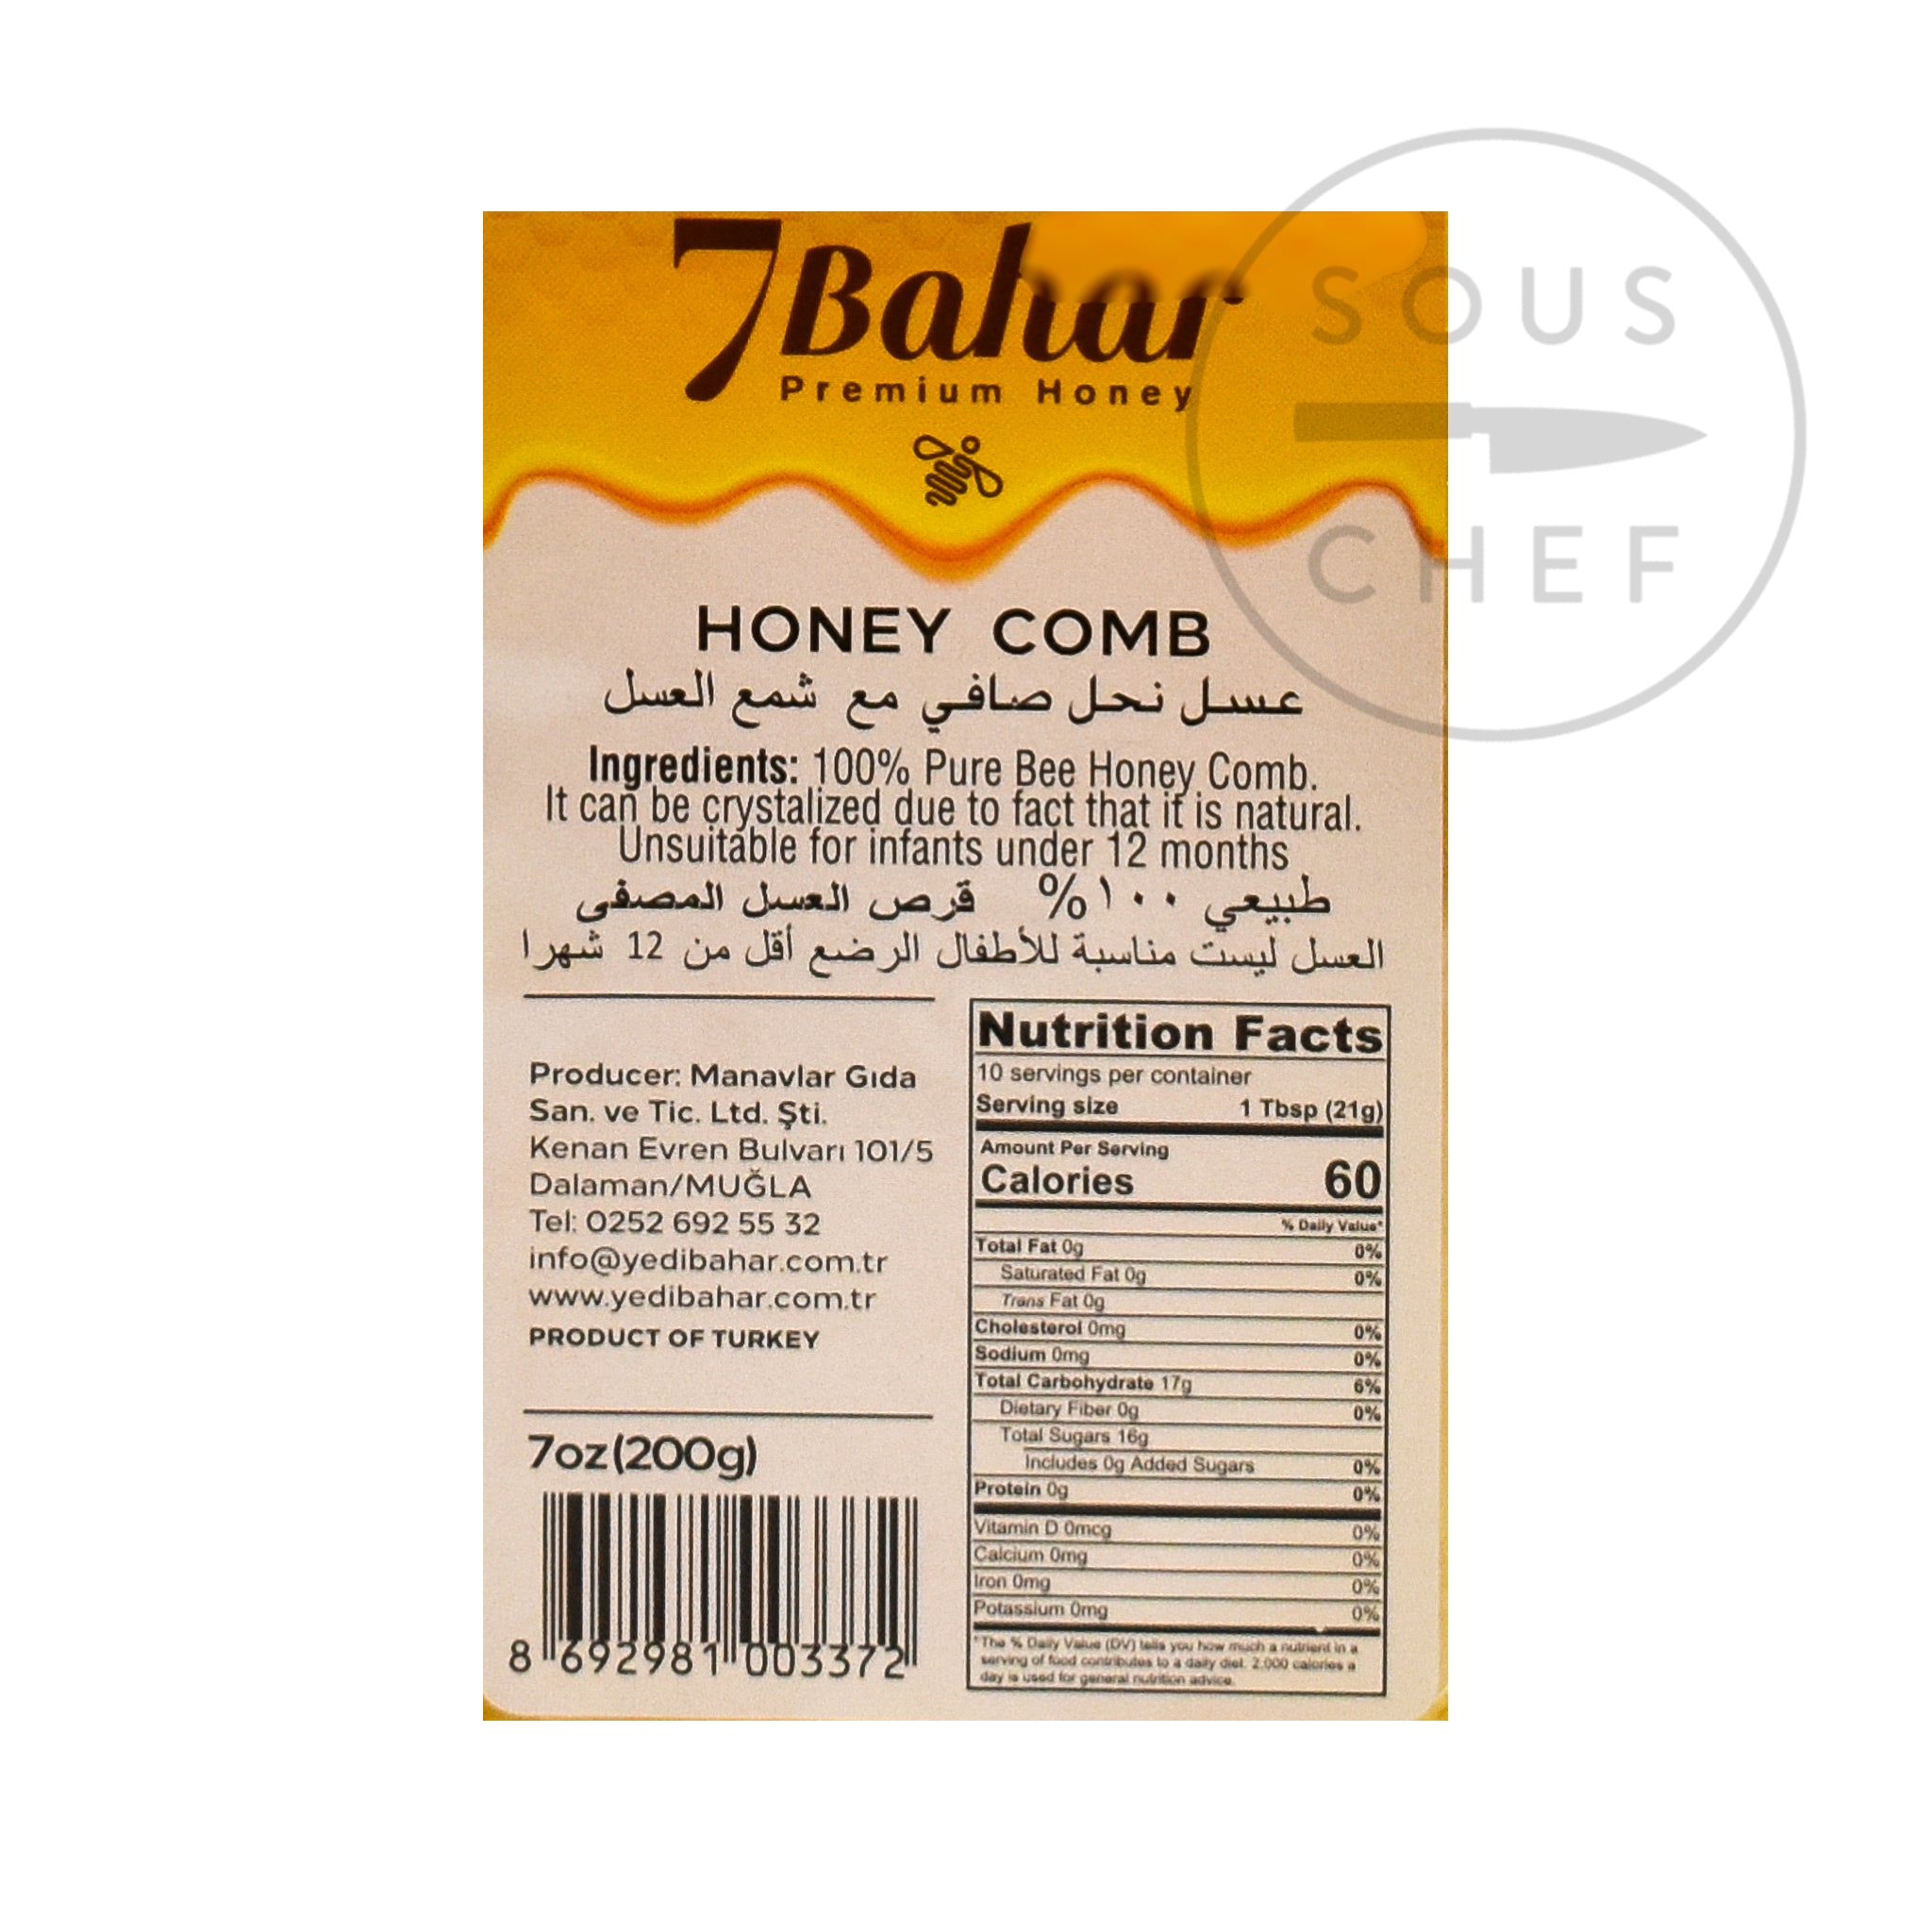 Real Honeycomb 200g ingredients nutritional information